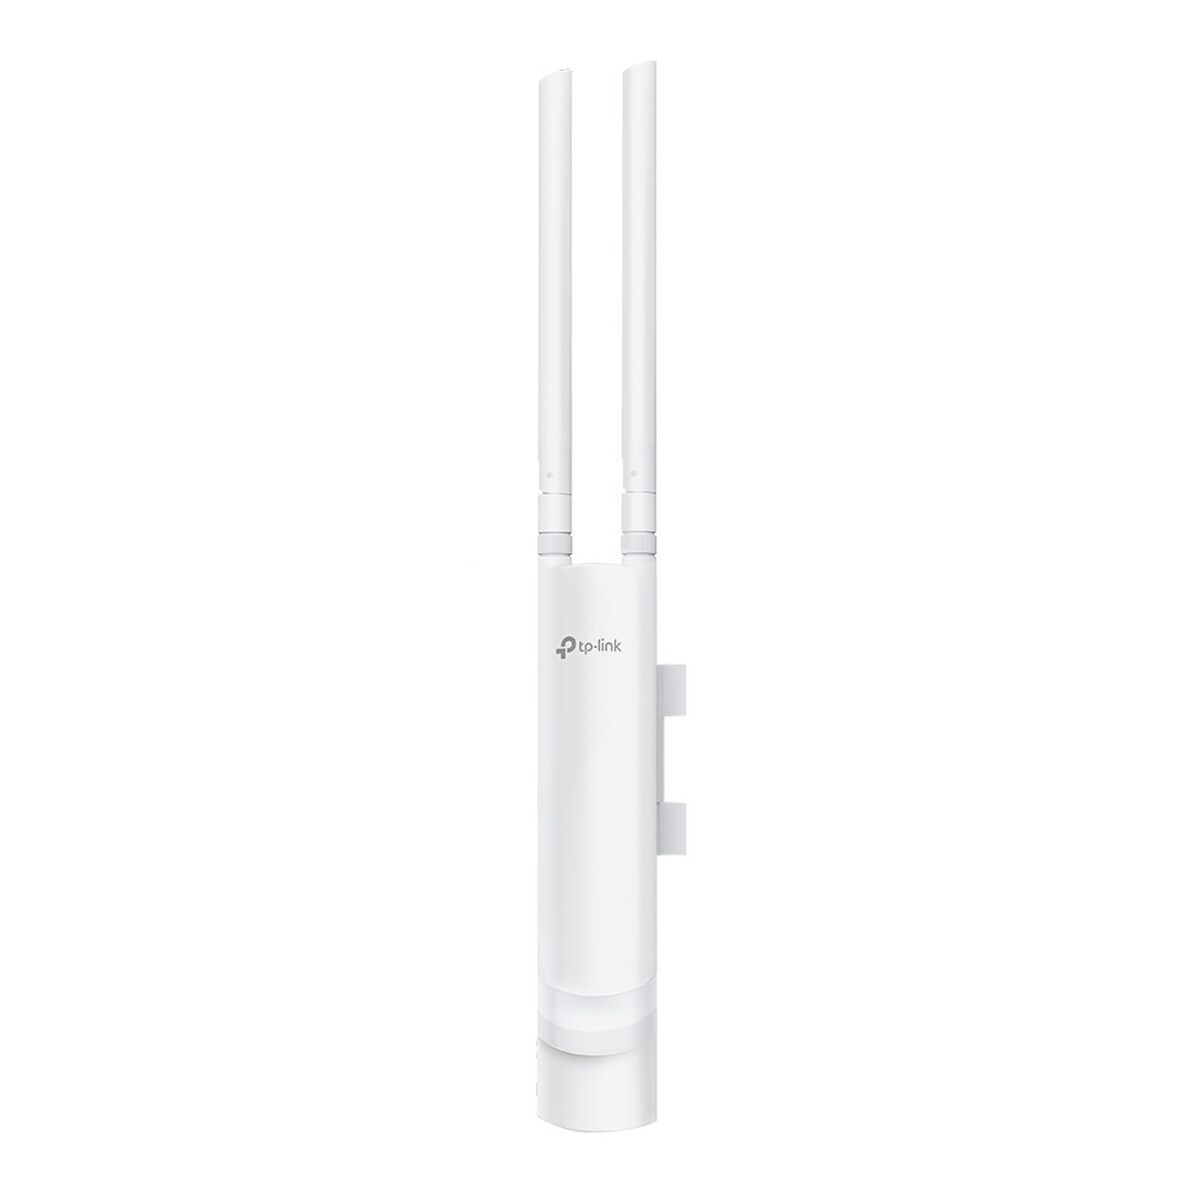 UTP Category 6 Rigid Network Cable TP-Link TL-EAP113-OUTDOOR White-1